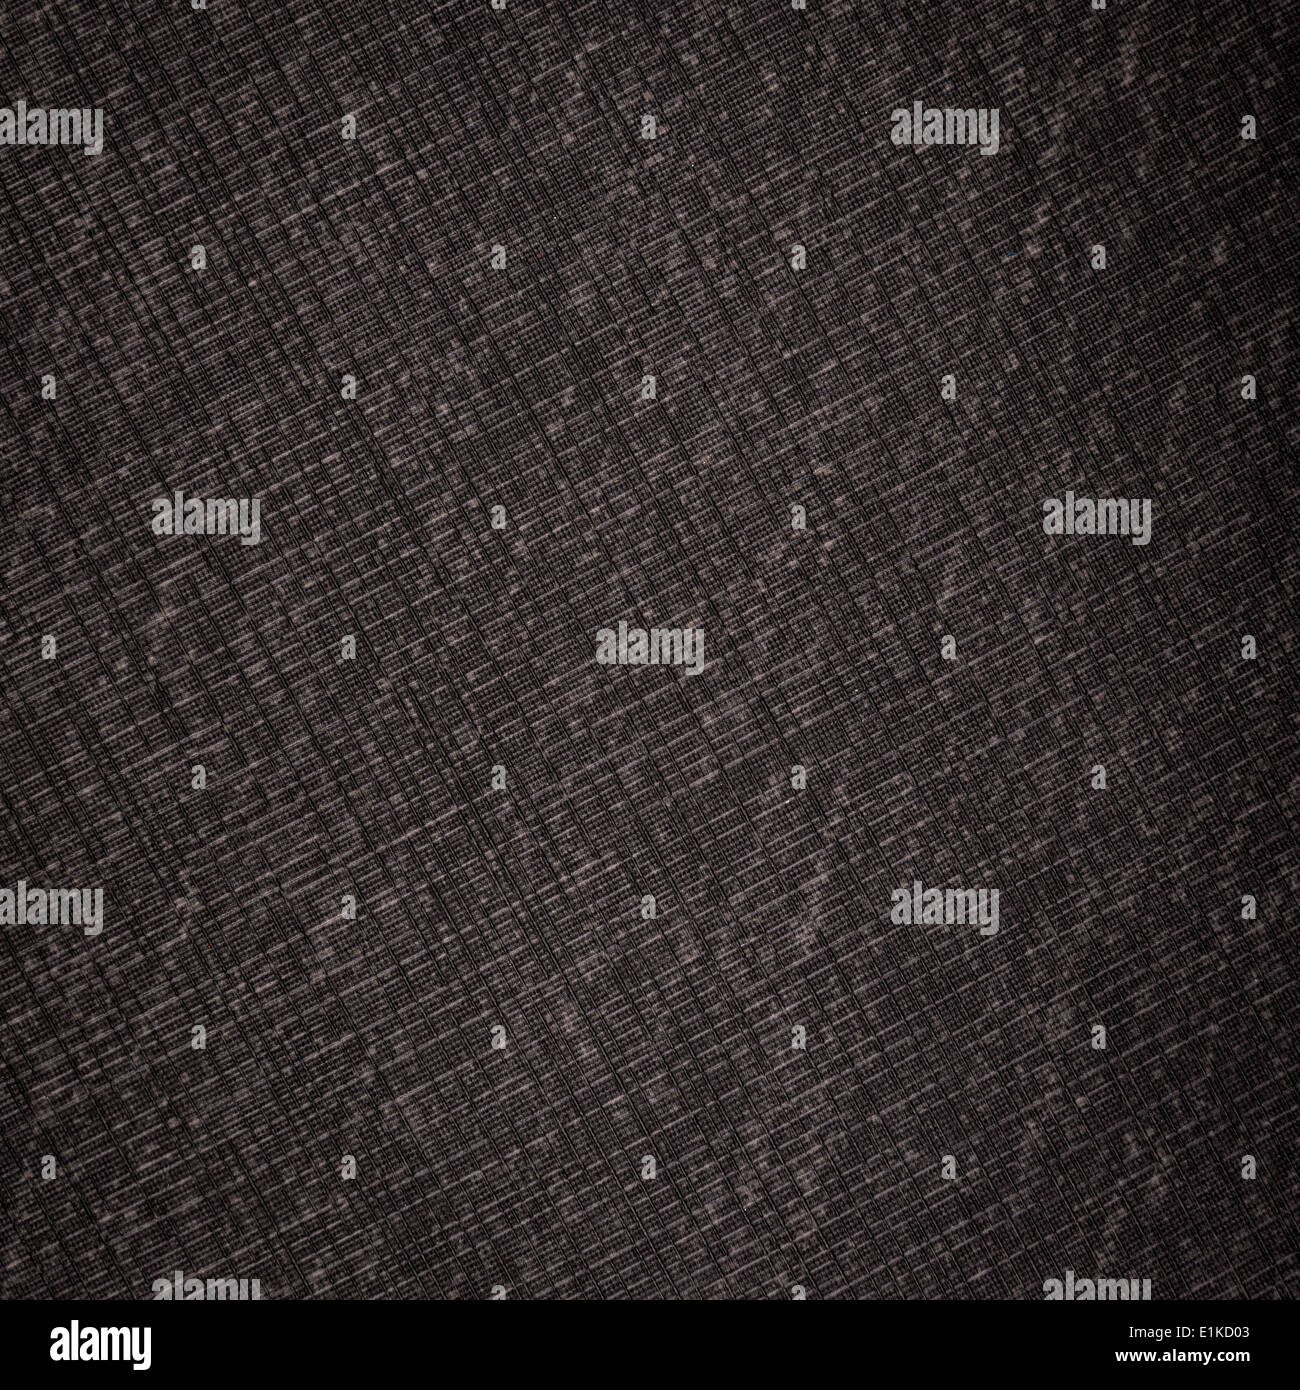 Piece Of Linen Fabric With Frayed Edges On Black Background.Monochrome  Photo Stock Photo, Picture and Royalty Free Image. Image 161033831.